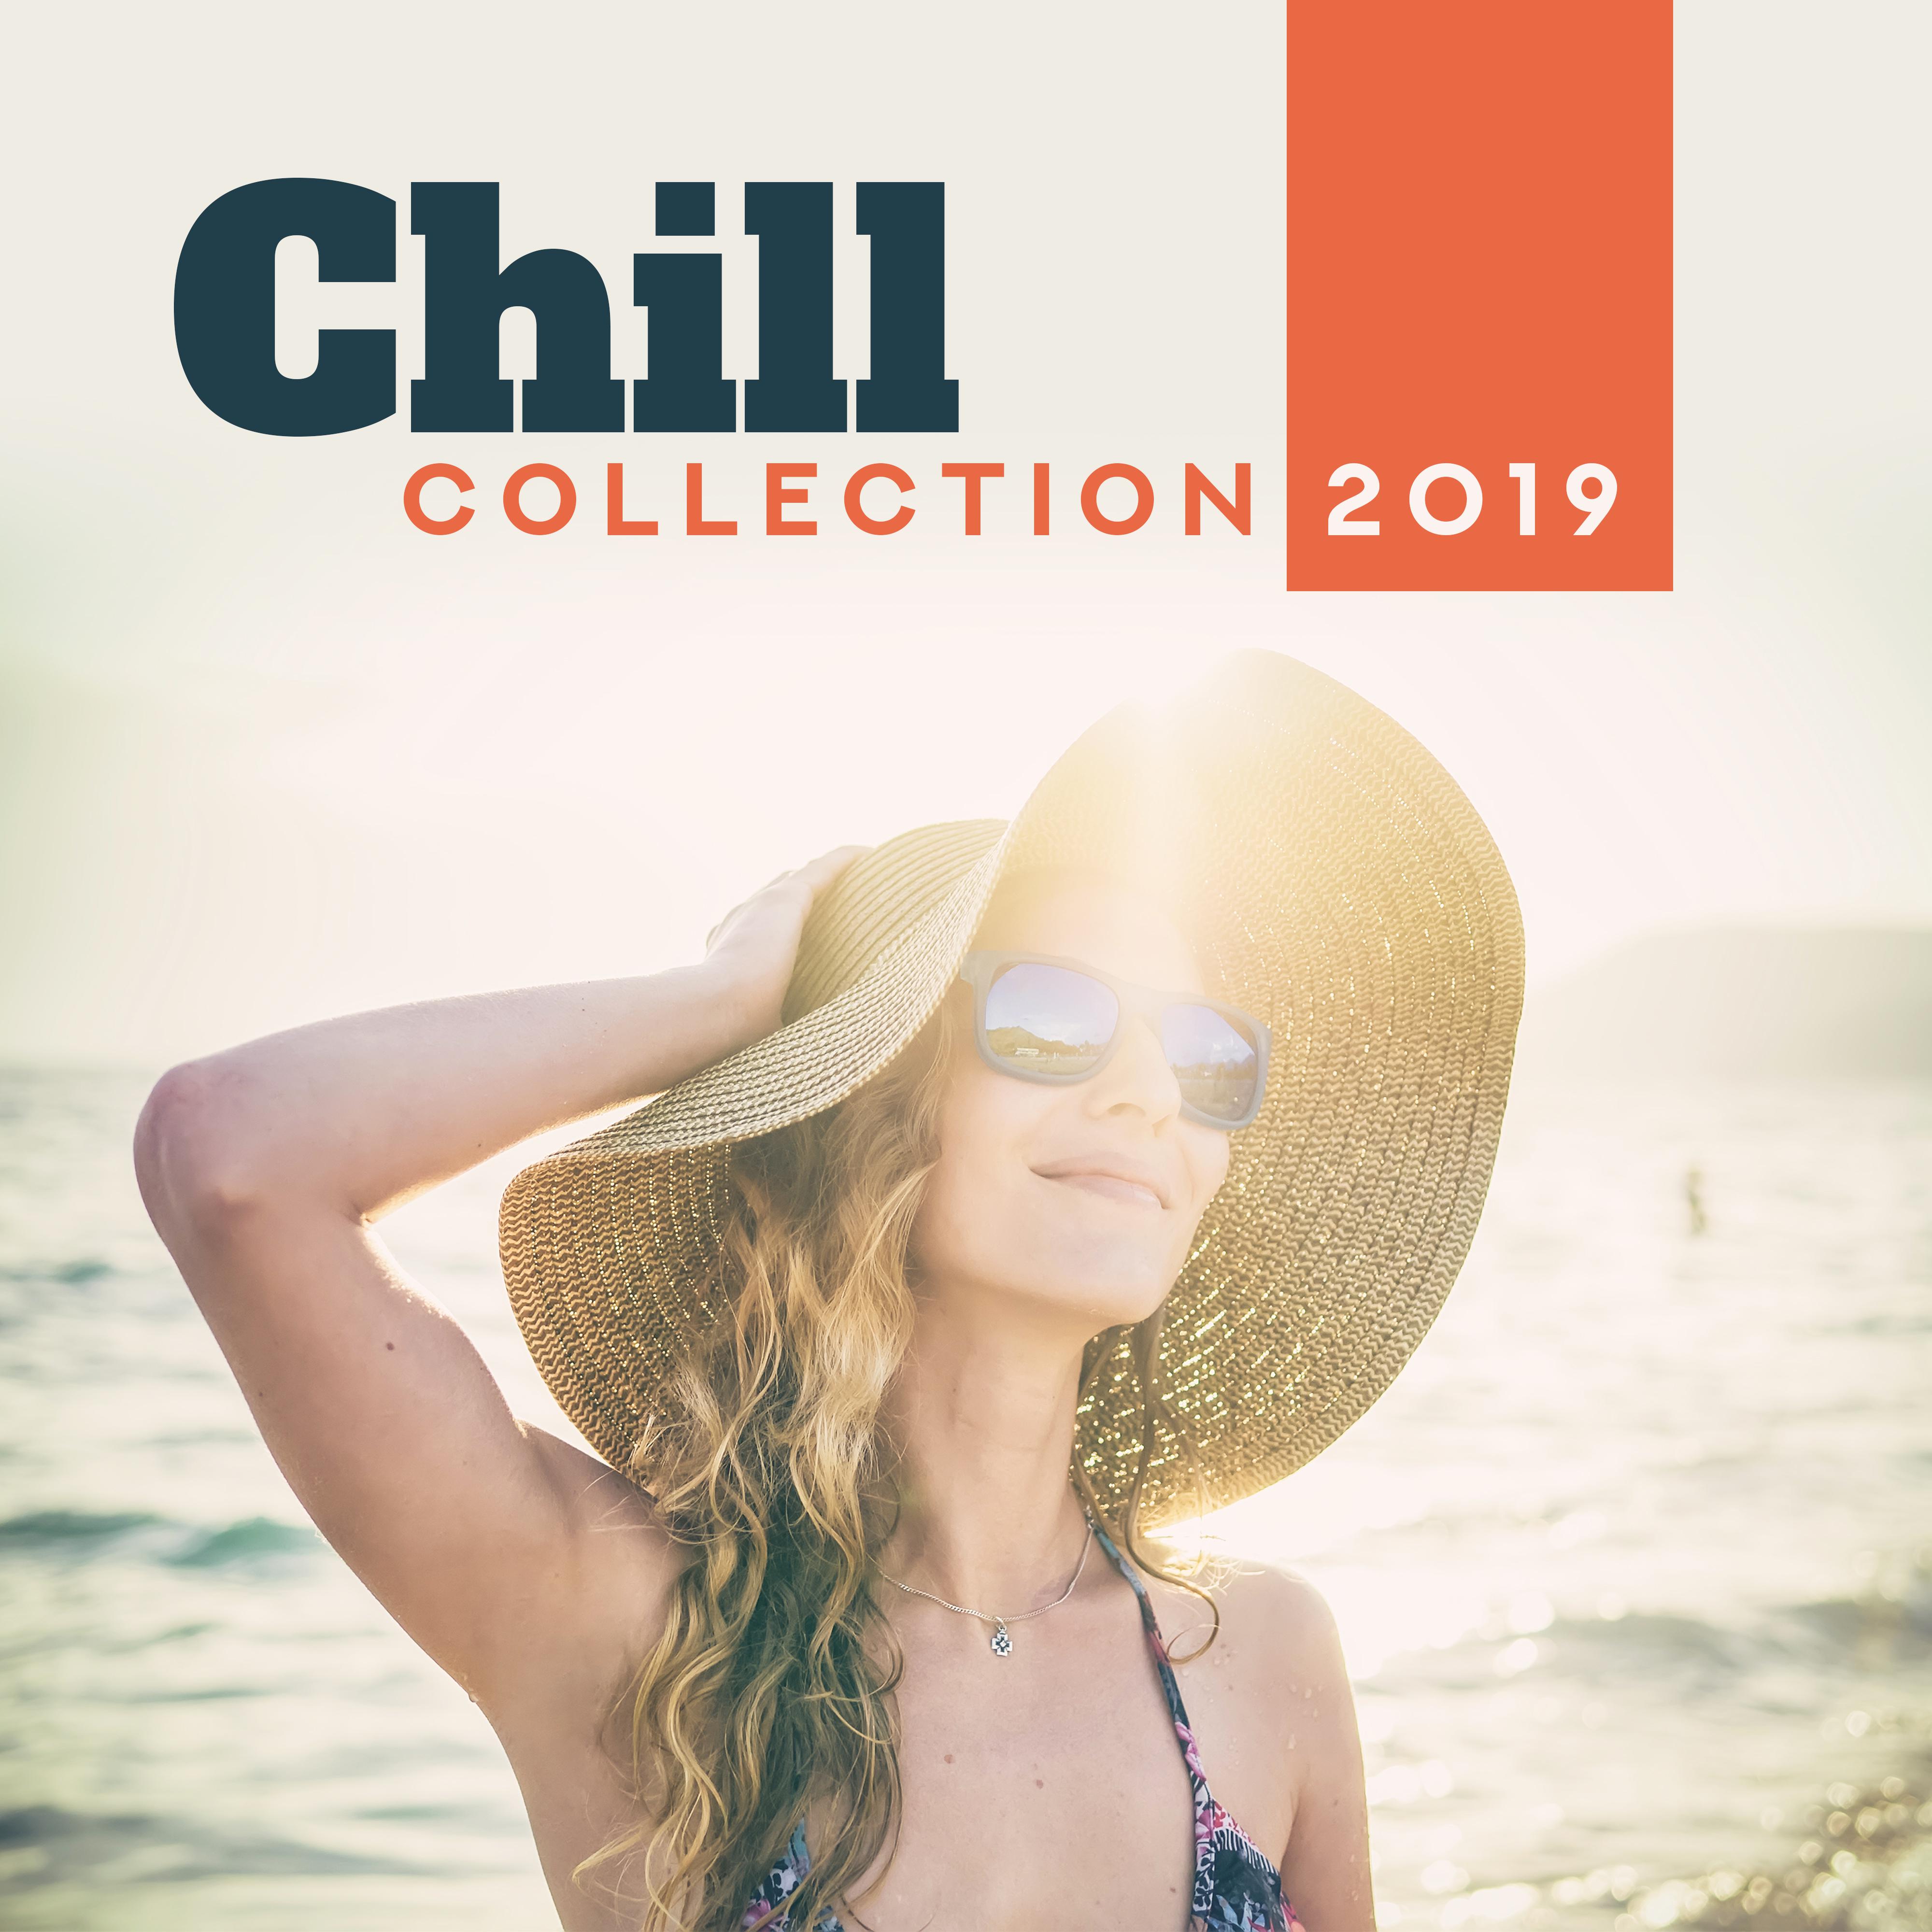 Chill Collection 2019  Ibiza Dance Party, Lounge Beach, Chillout Beats, Relax, Bar Lounge, Cocktail Music, Party Hits 2019